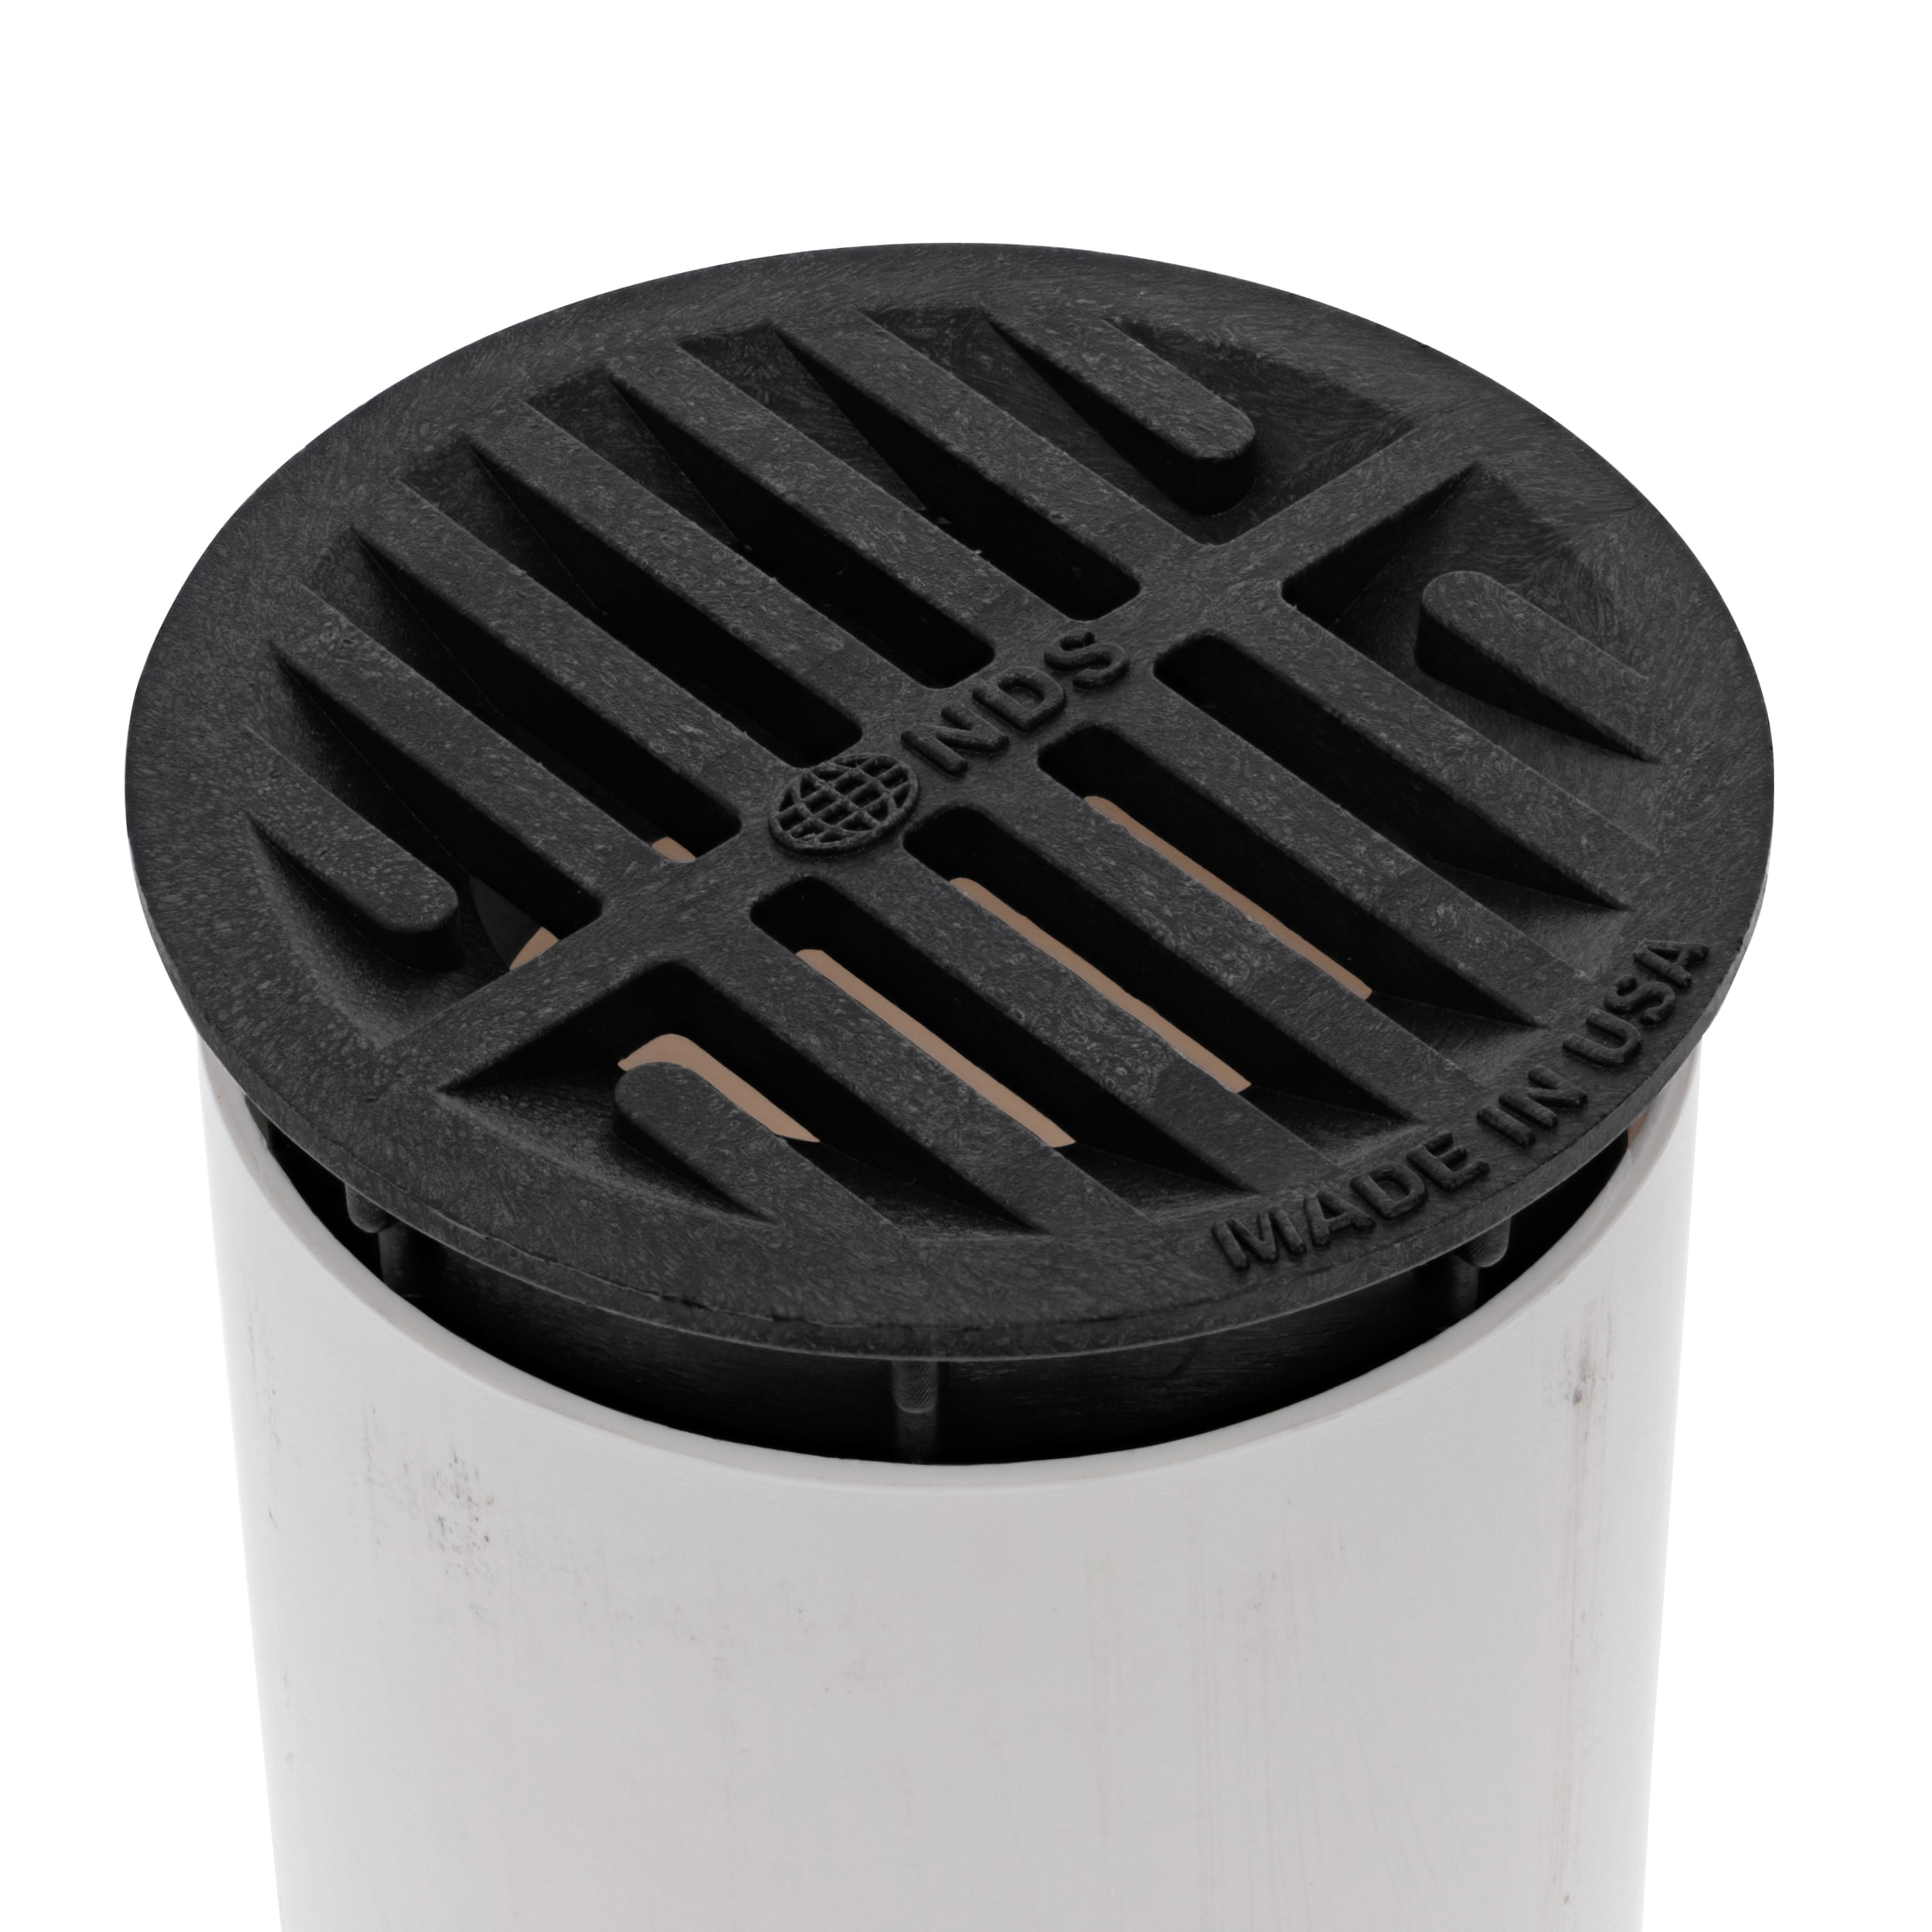 NDS 5 in. Plastic Square Drainage Grate in Black 8 - The Home Depot